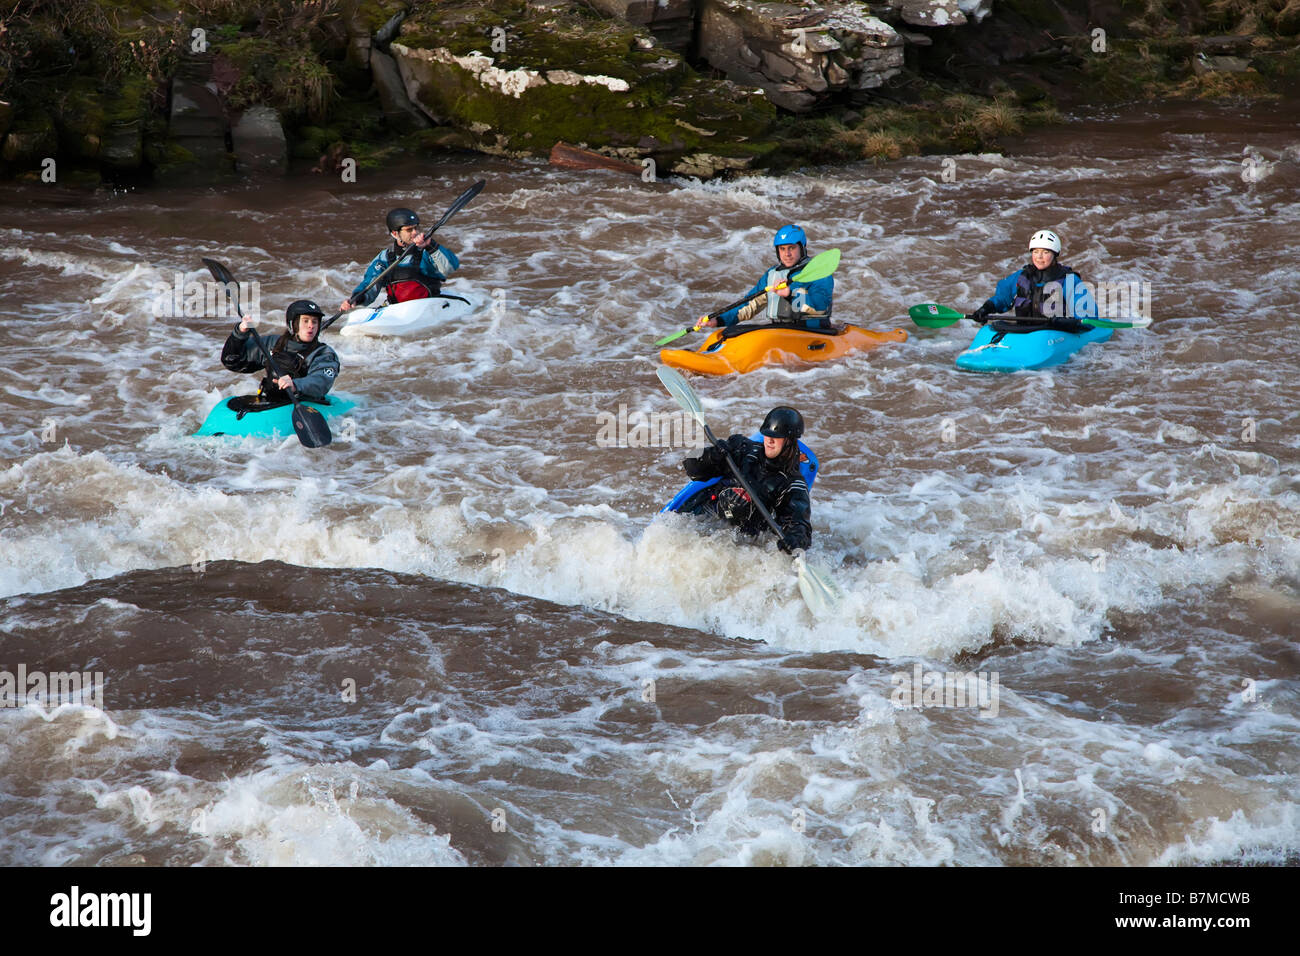 Five kayaks in white water River Usk Wales UK Stock Photo